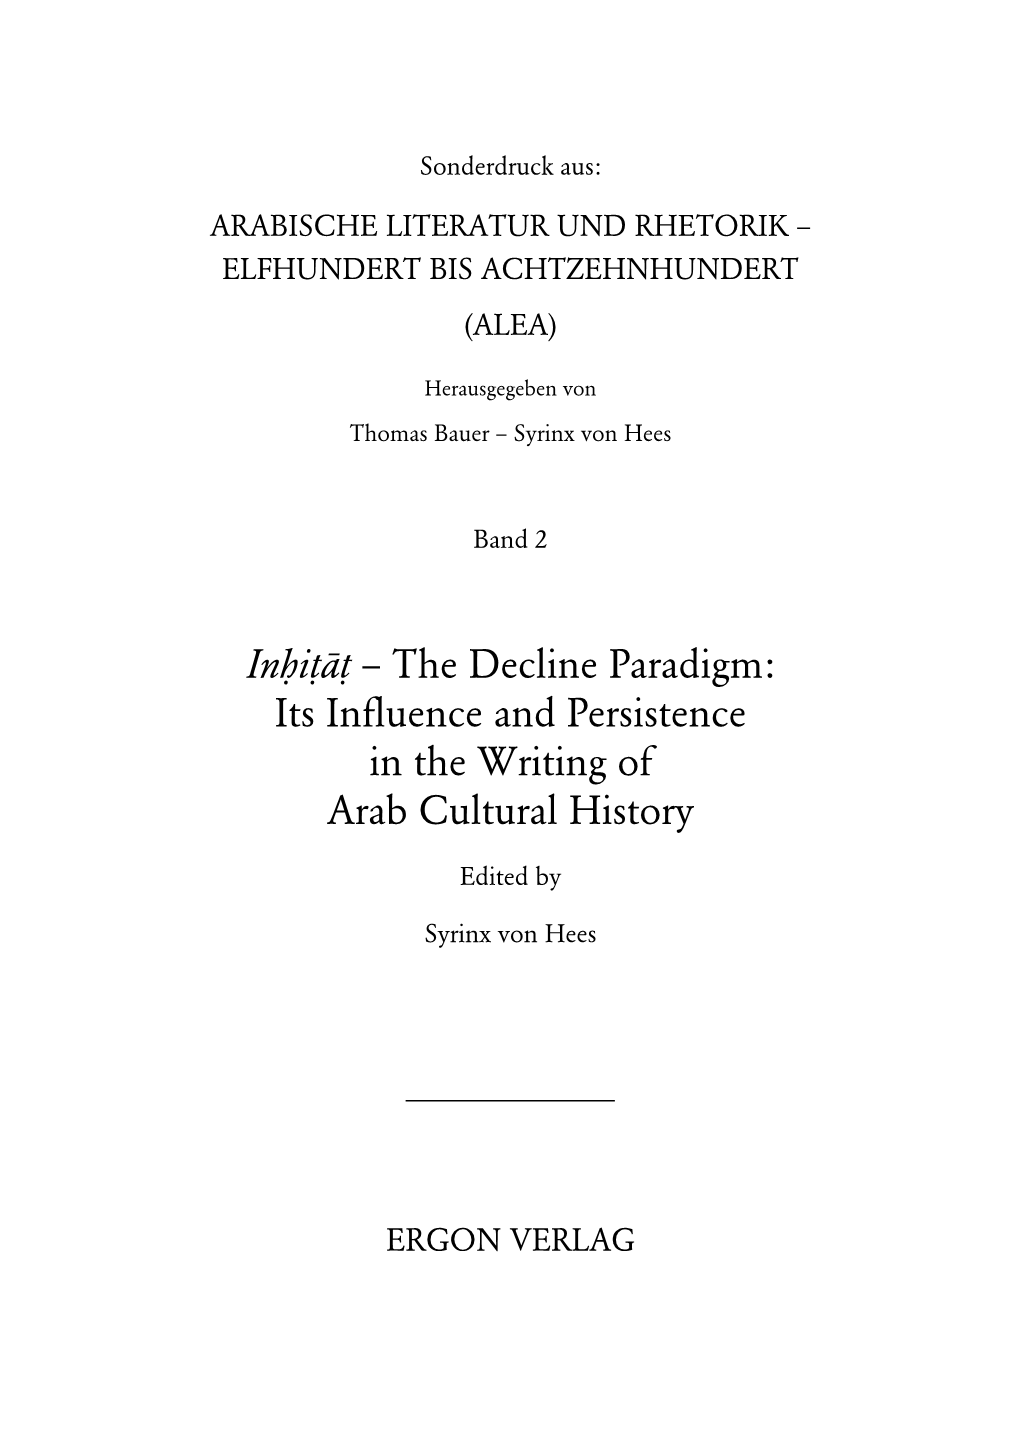 Inḥiṭāṭ – the Decline Paradigm: Its Influence and Persistence in the Writing of Arab Cultural History